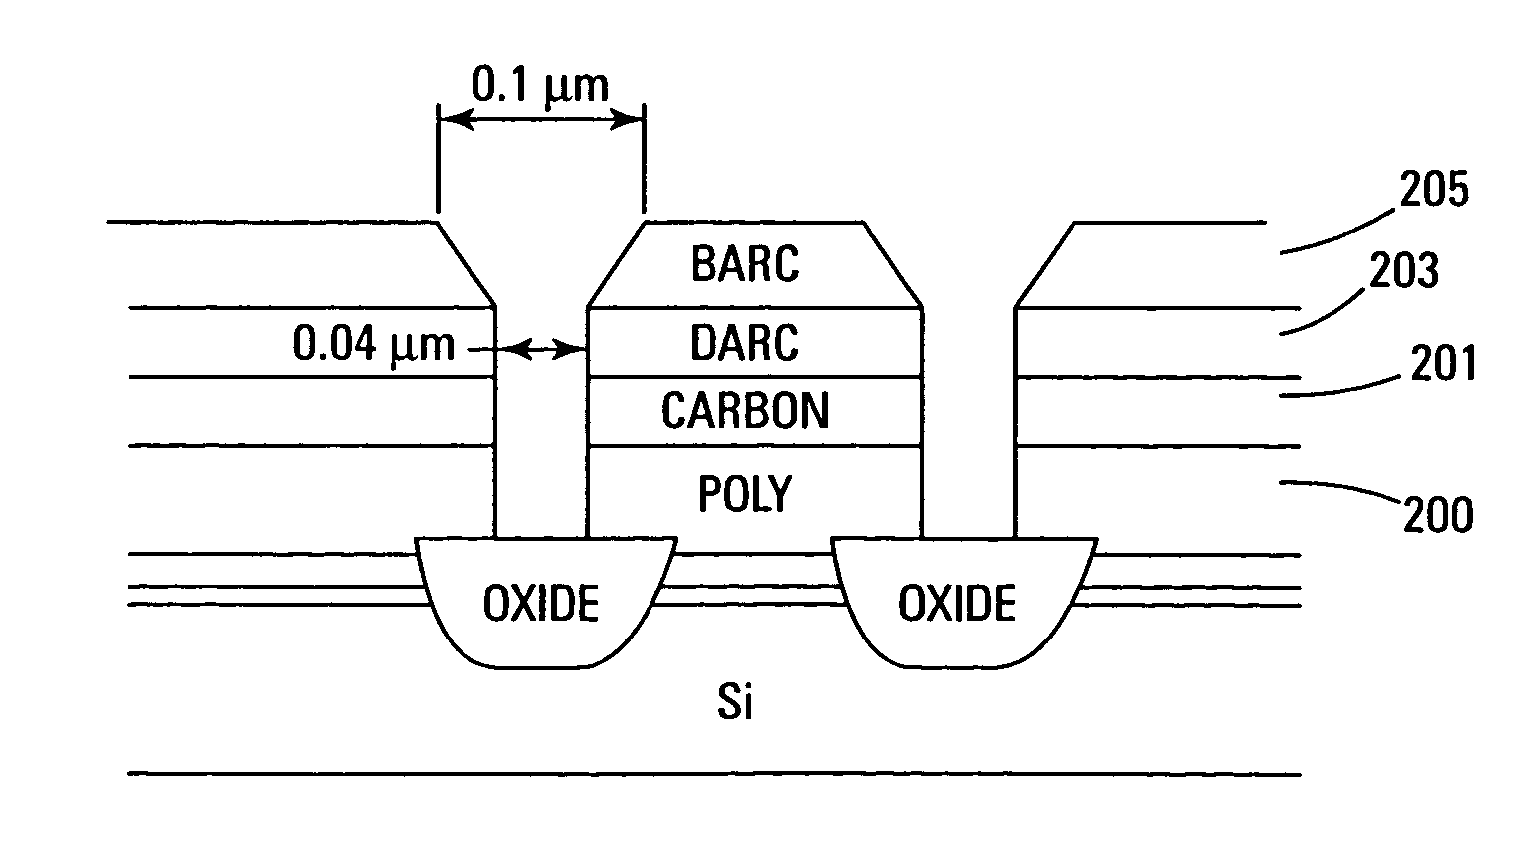 Flash memory cells with reduced distances between cell elements